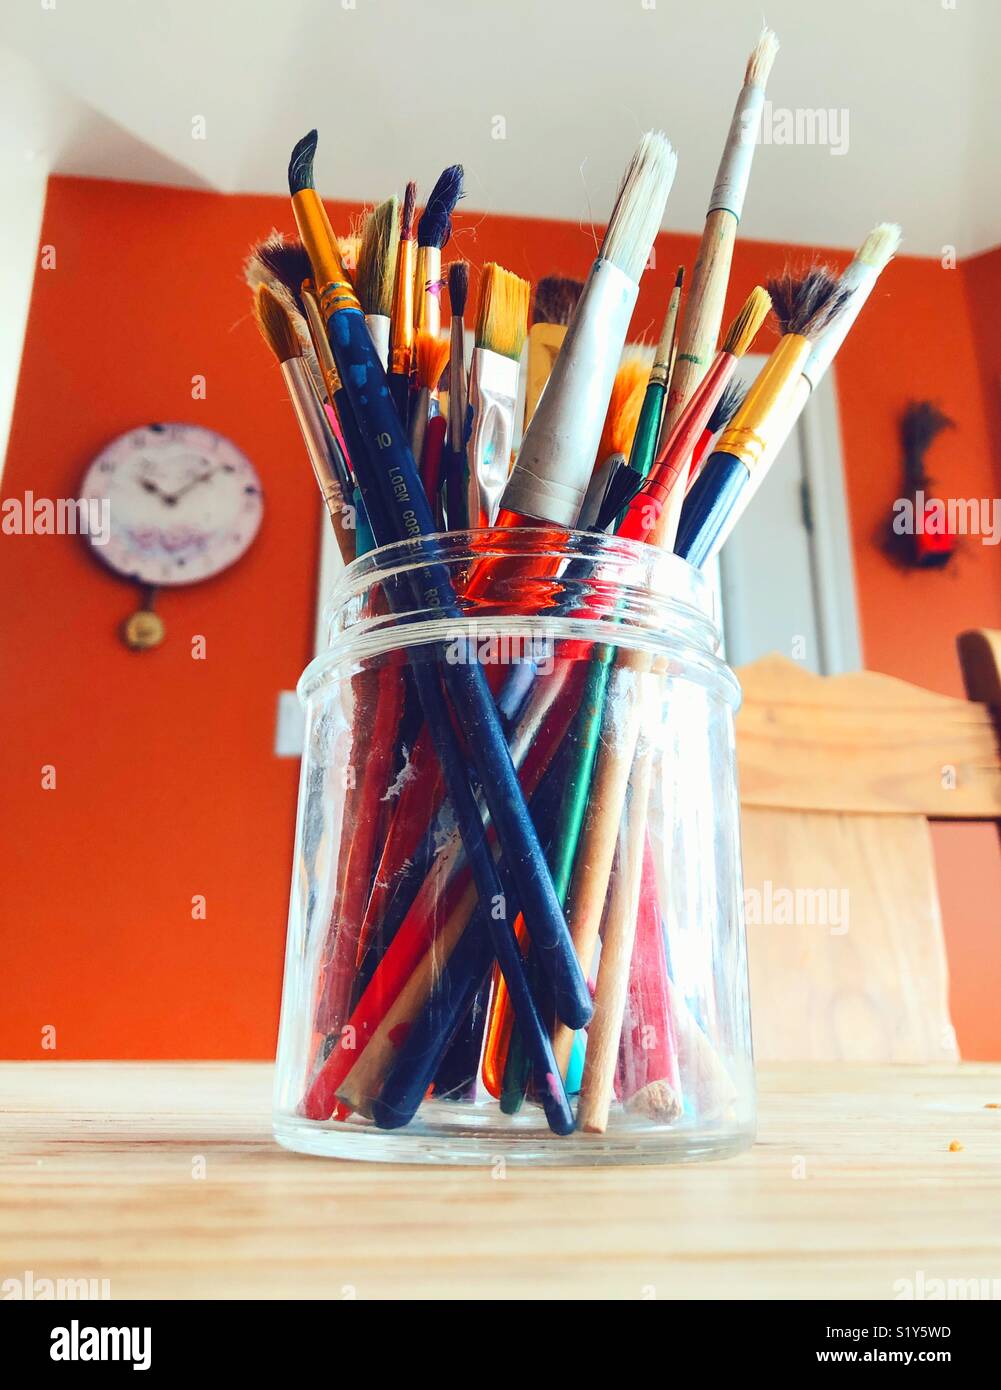 Brightly coloured mixed paintbrushes in a glass jar on a wooden table Stock Photo